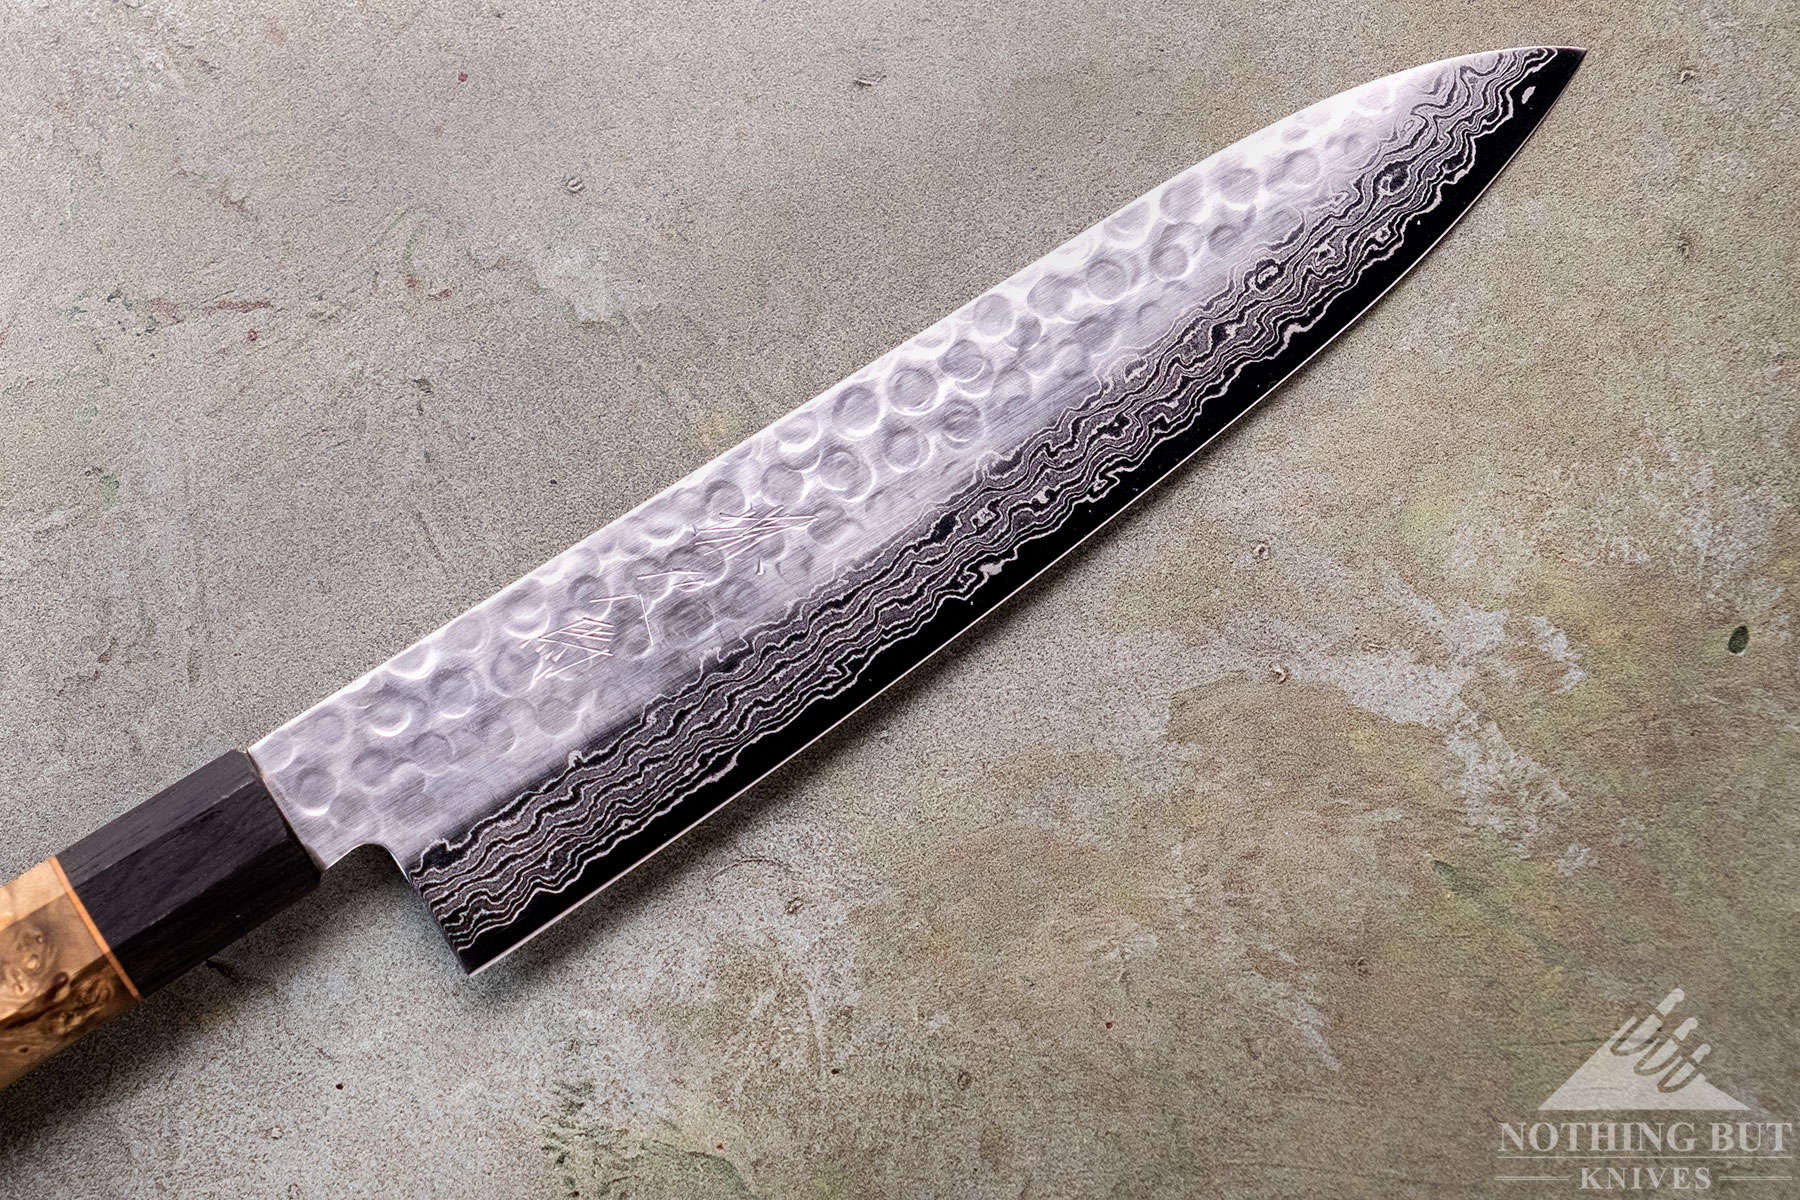 The VG10 steel blade of this Oishya chef knife has decent edge retention and great blade geometry. 